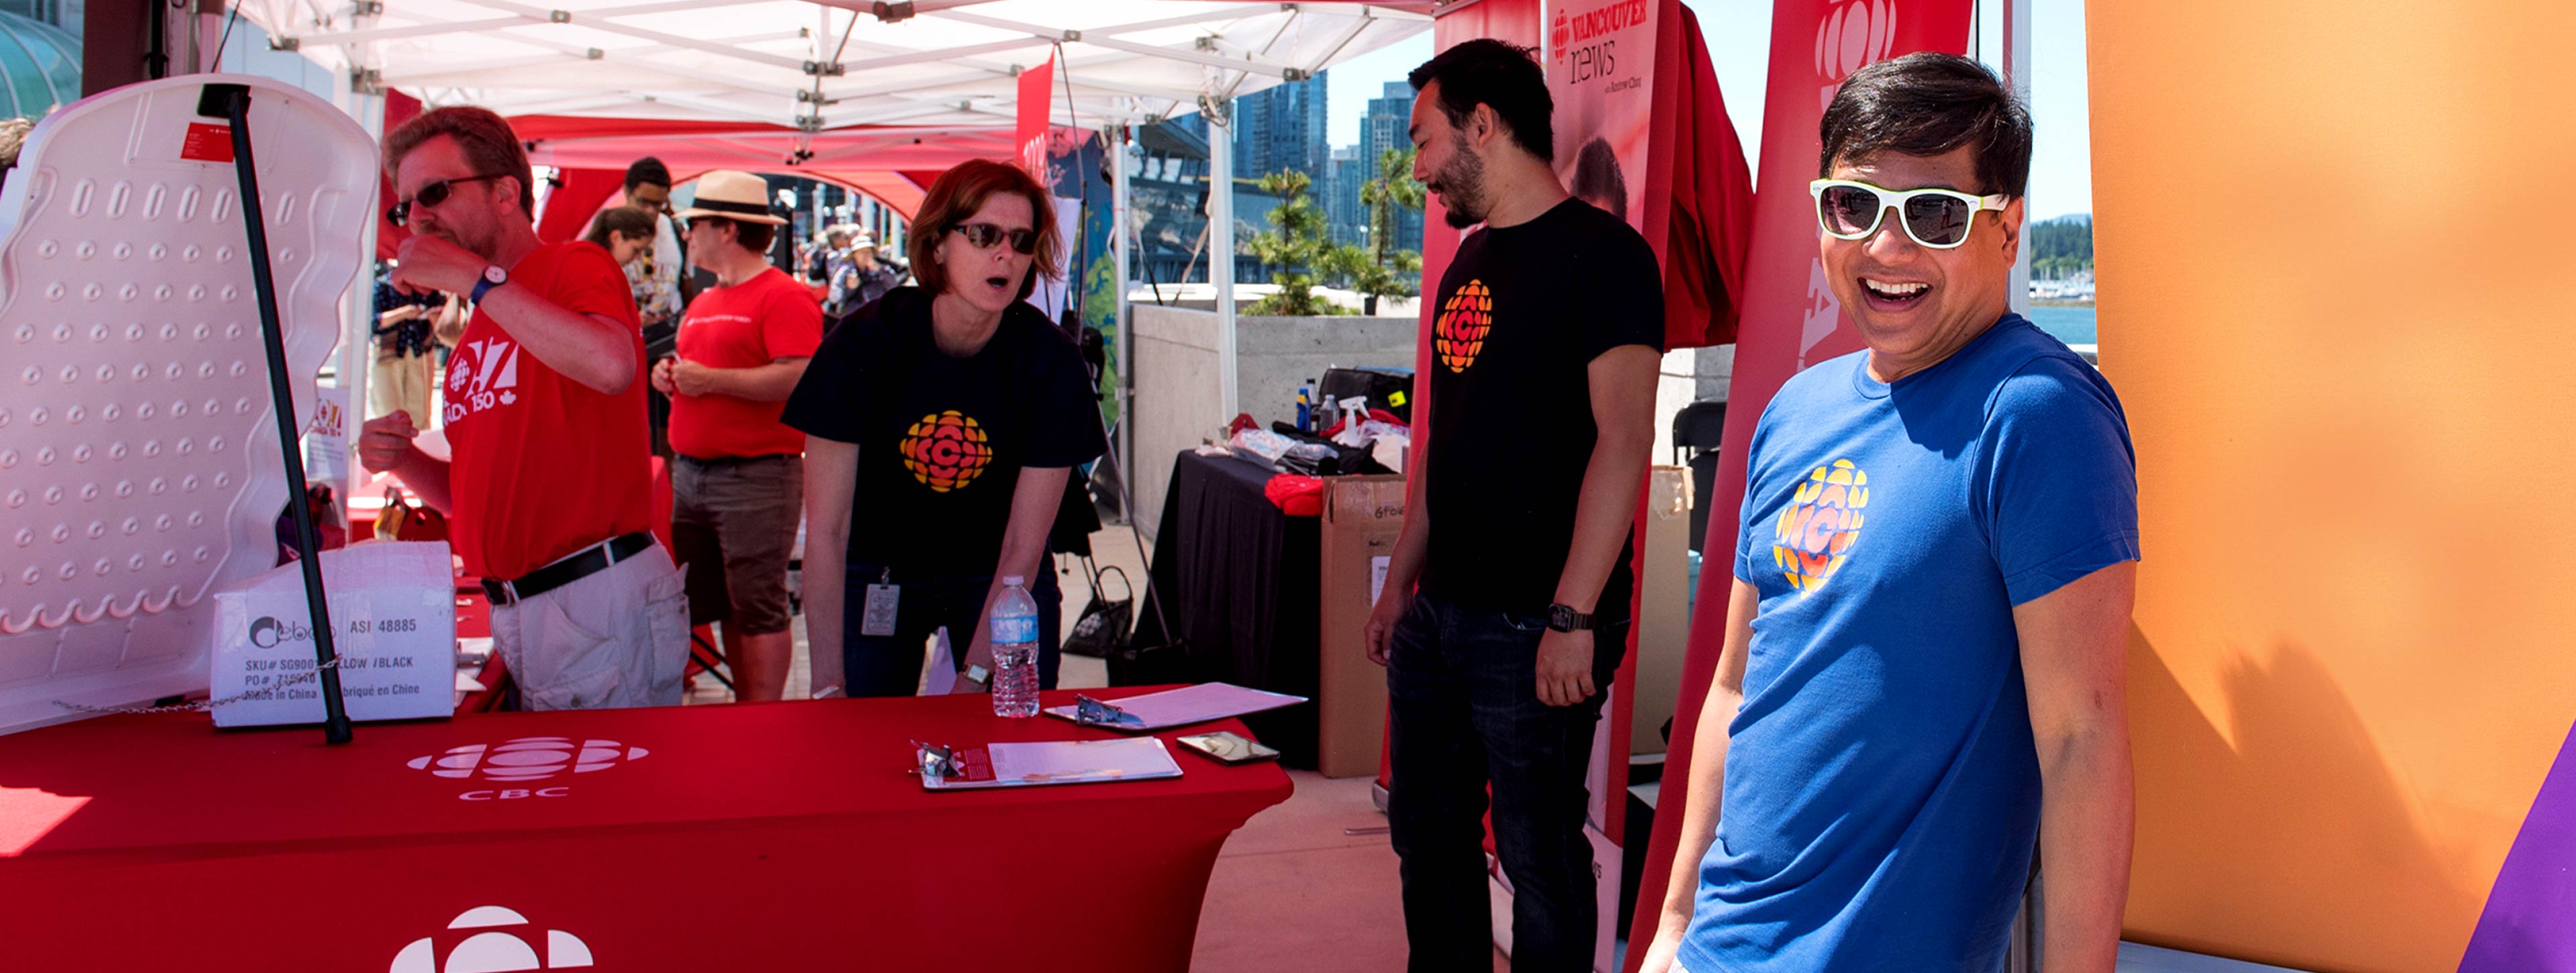 CBC ambassadors under the CBC tent on Canada Day 2017 in Vancouver.